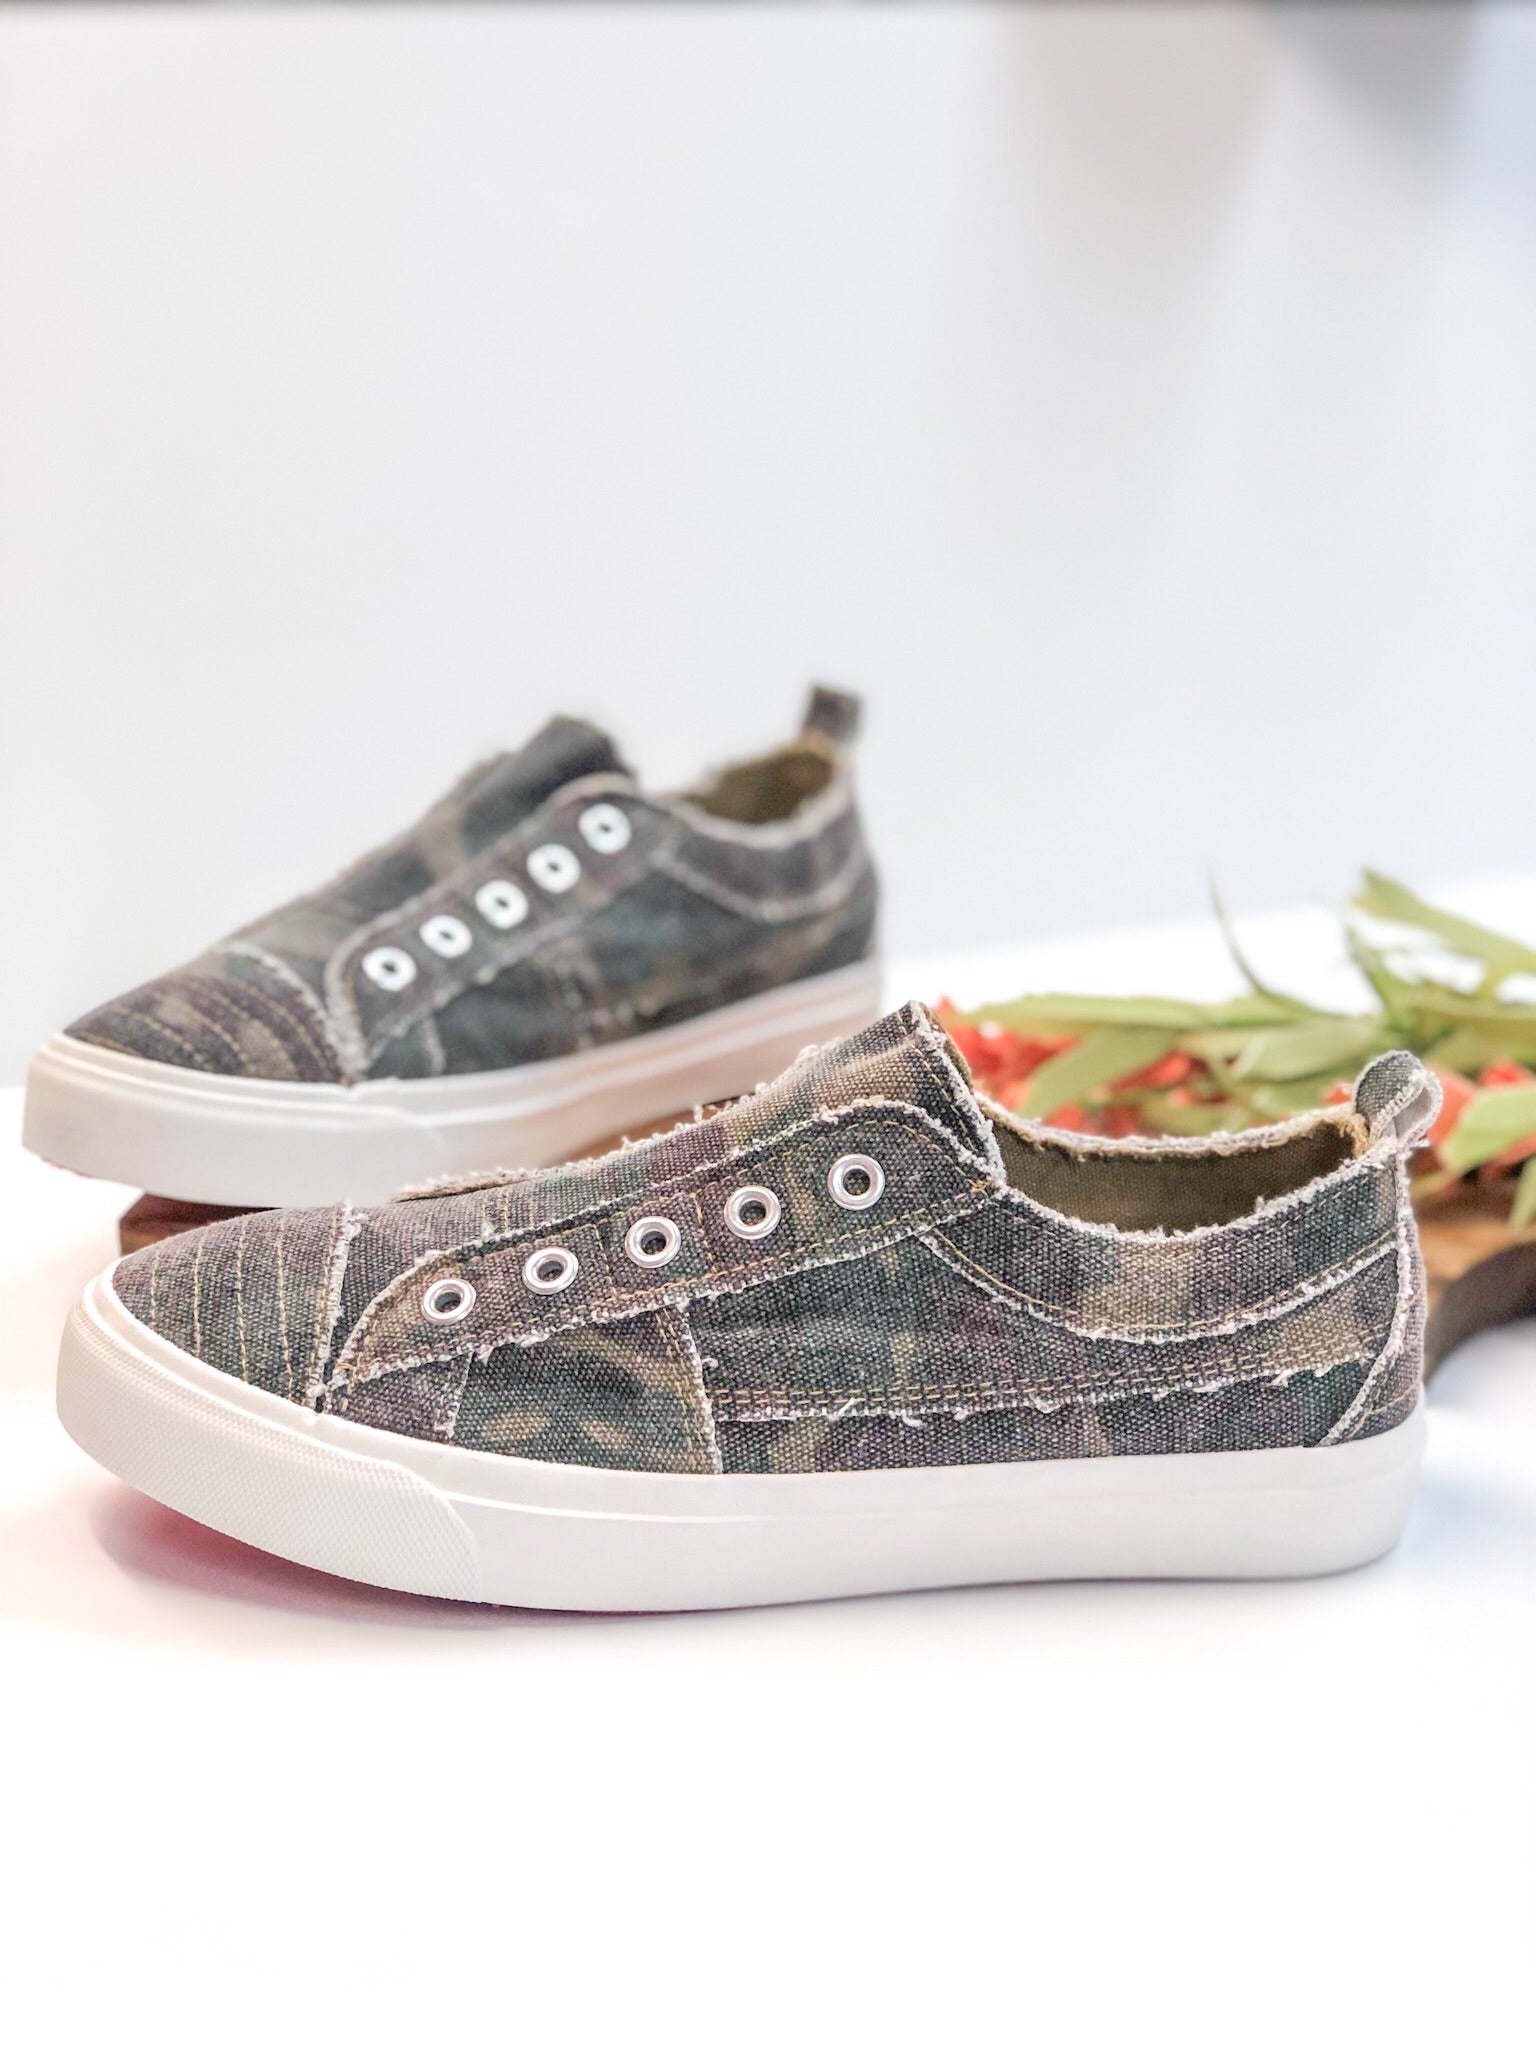 Last Chance Size 6 & 7 | Corky's | Babalu Slip On Sneakers in Camo - Giddy Up Glamour Boutique